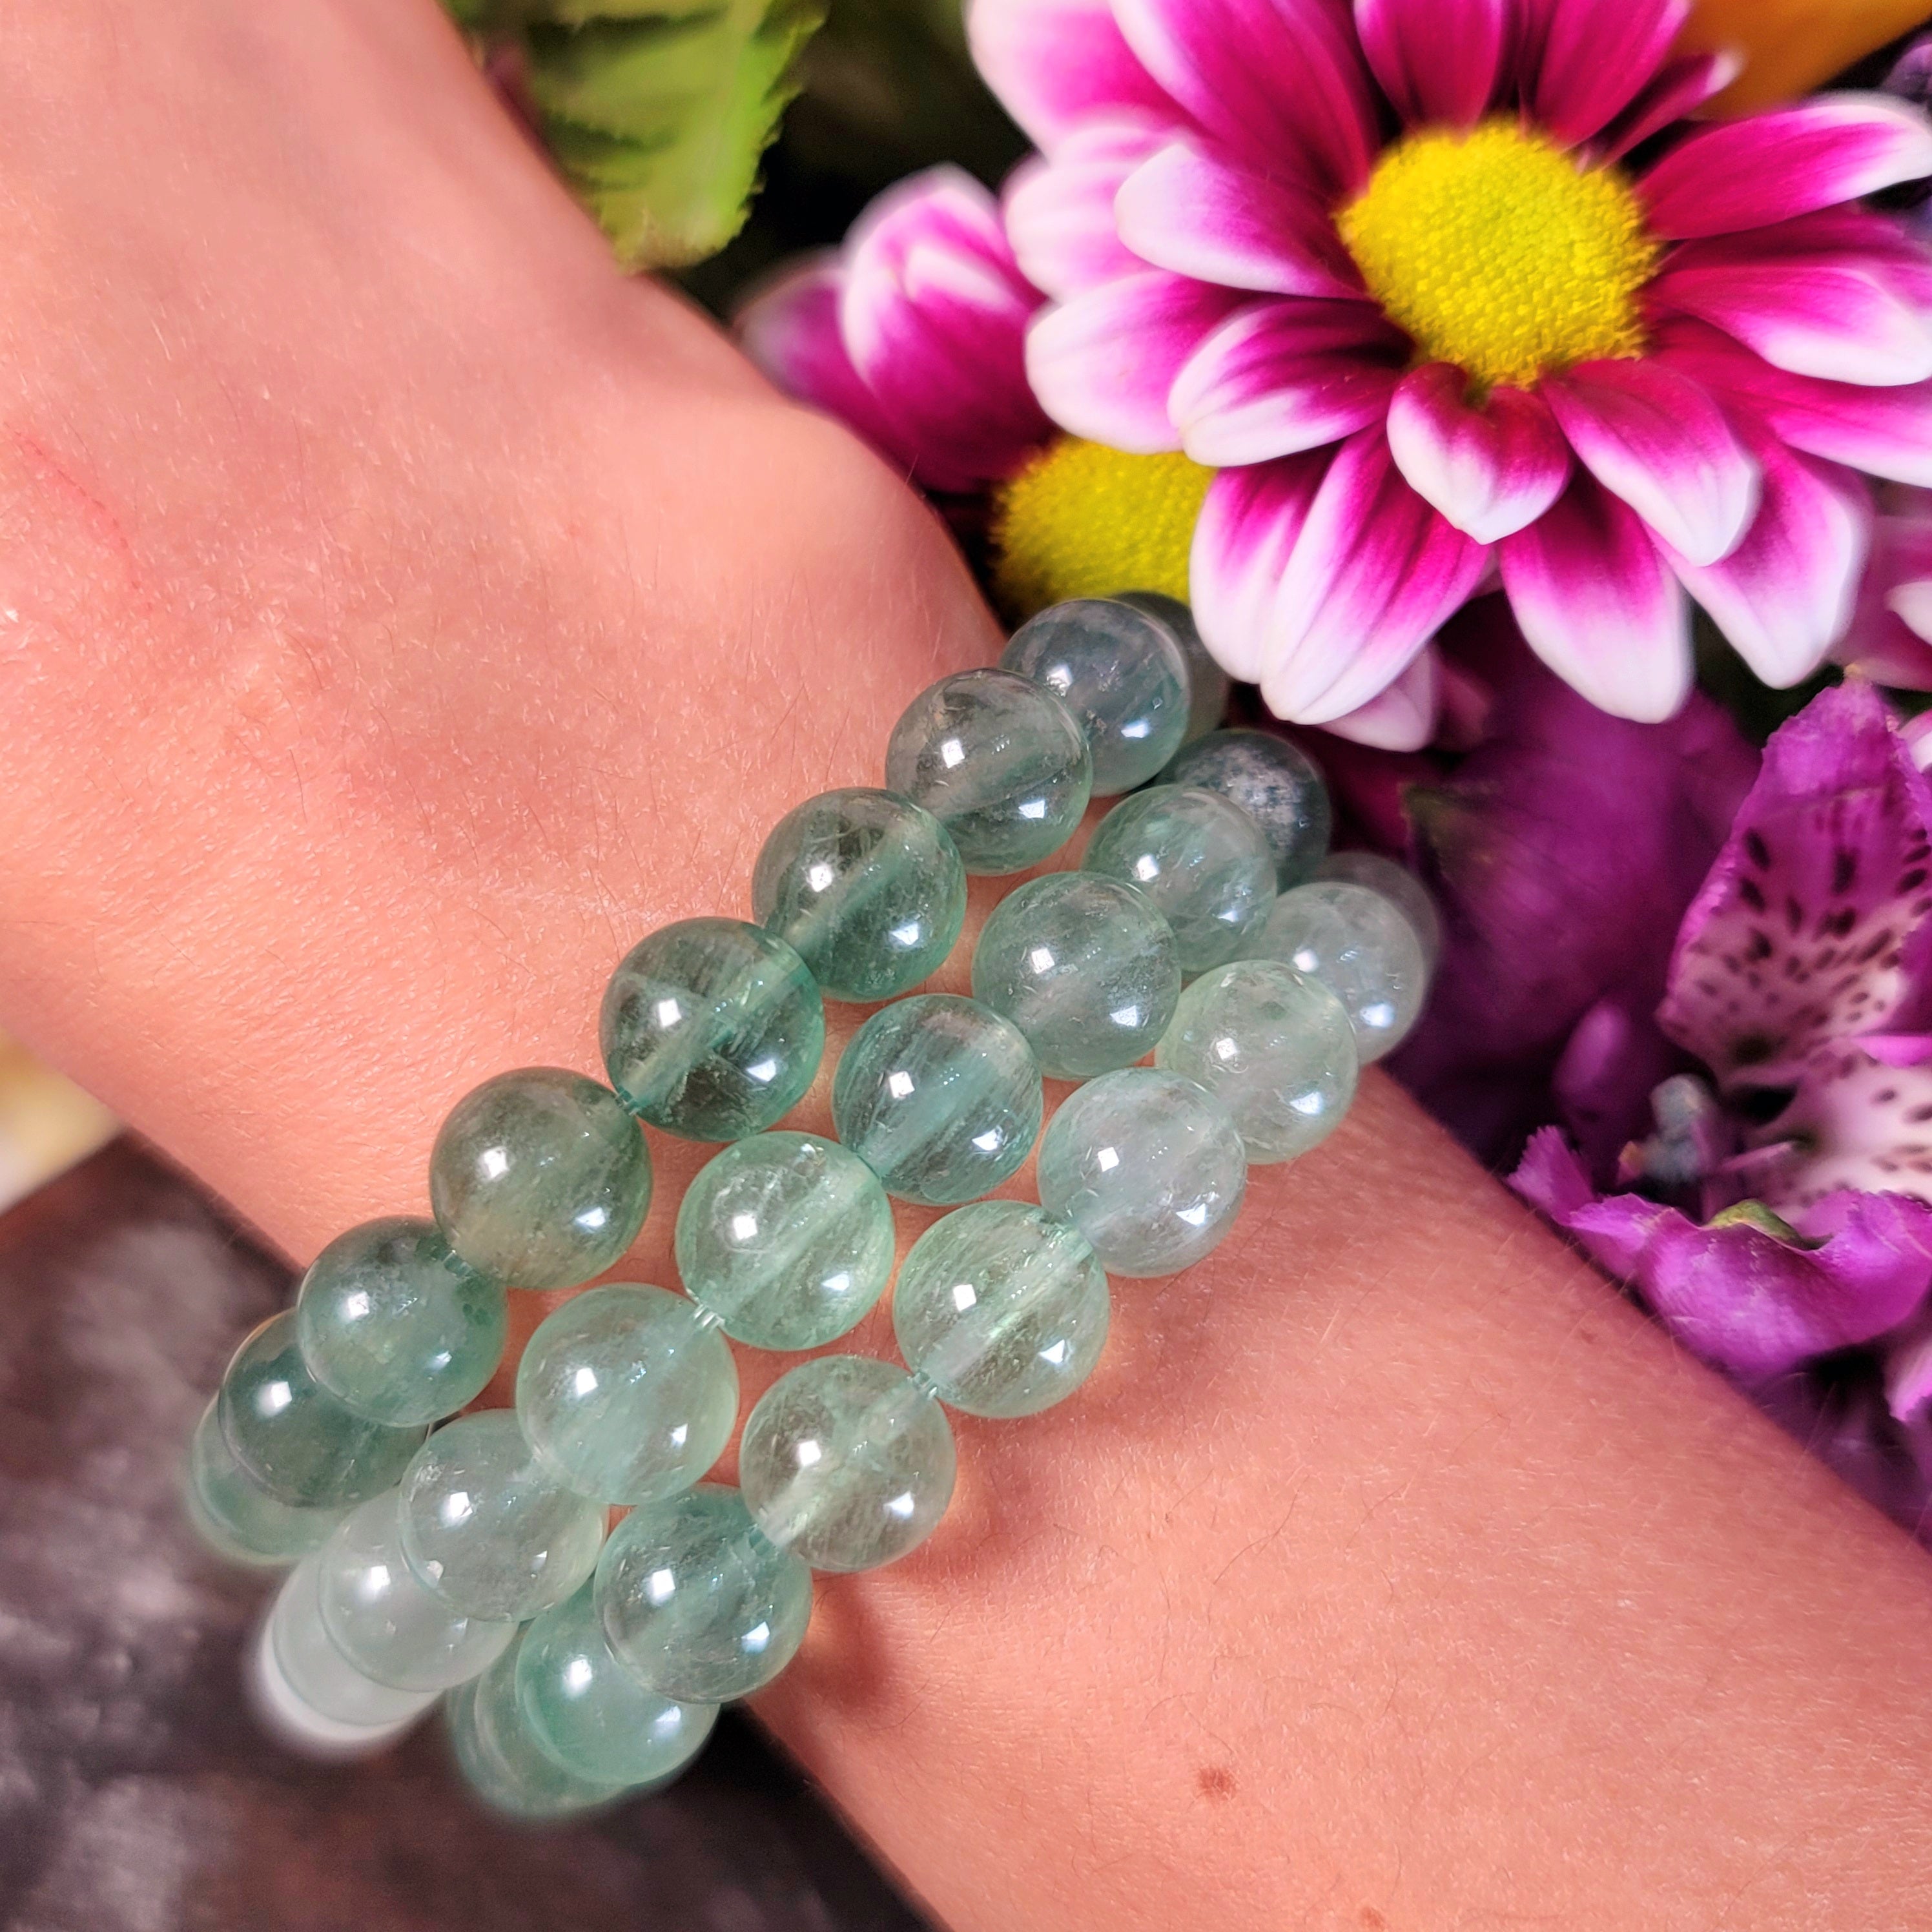 Green Fluorite Waterfall Bracelet for Focus, Learning and Releasing